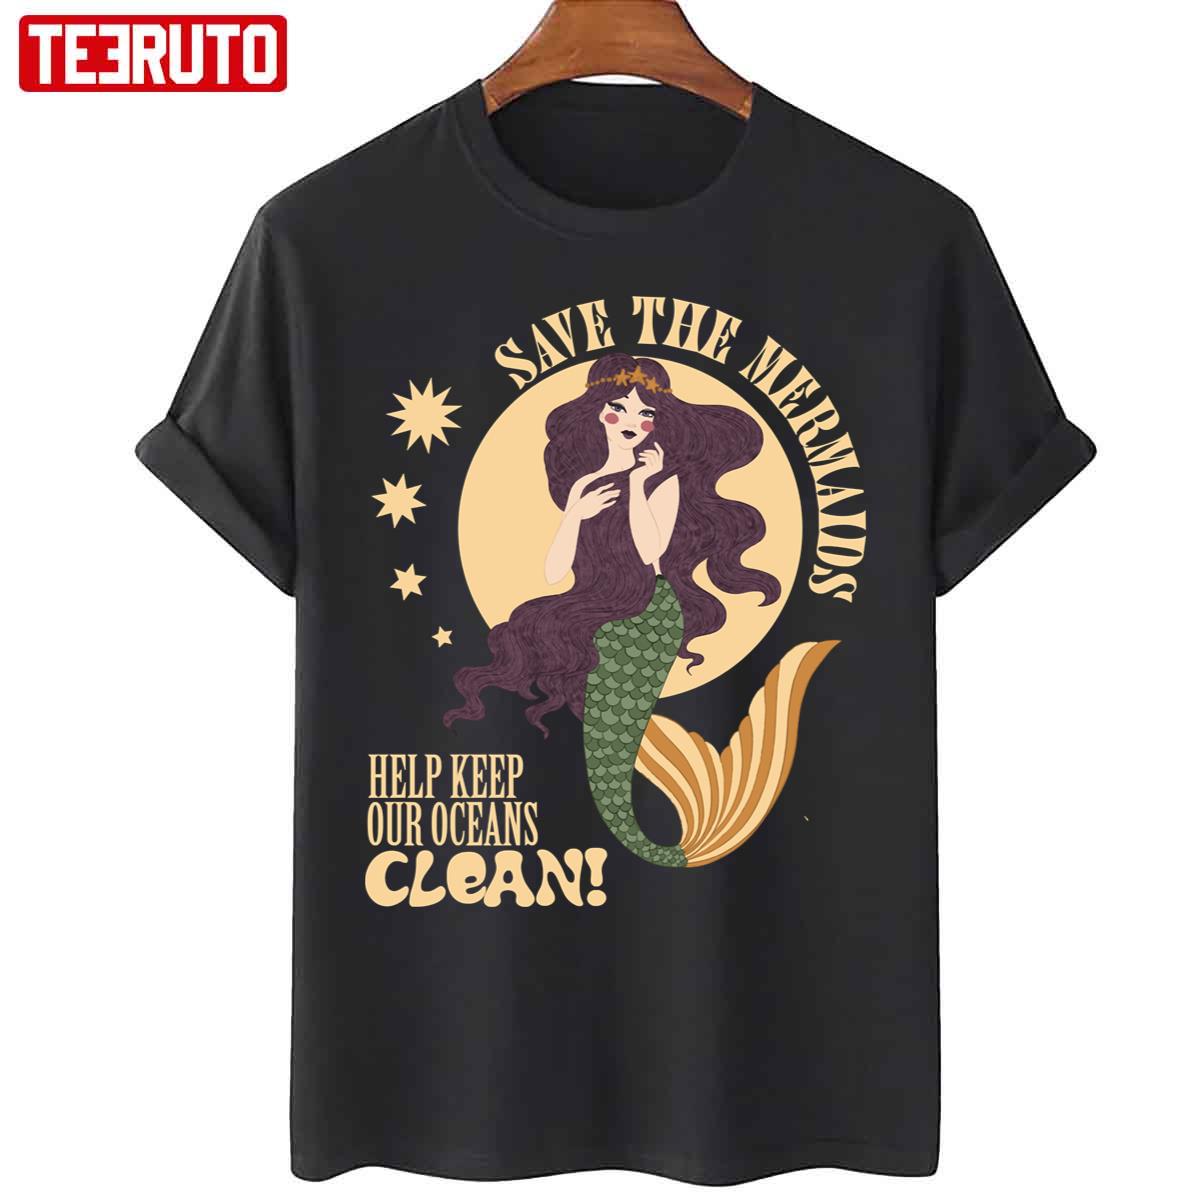 Save The Mermaids Keep Our Oceans Clean Unisex T-Shirt